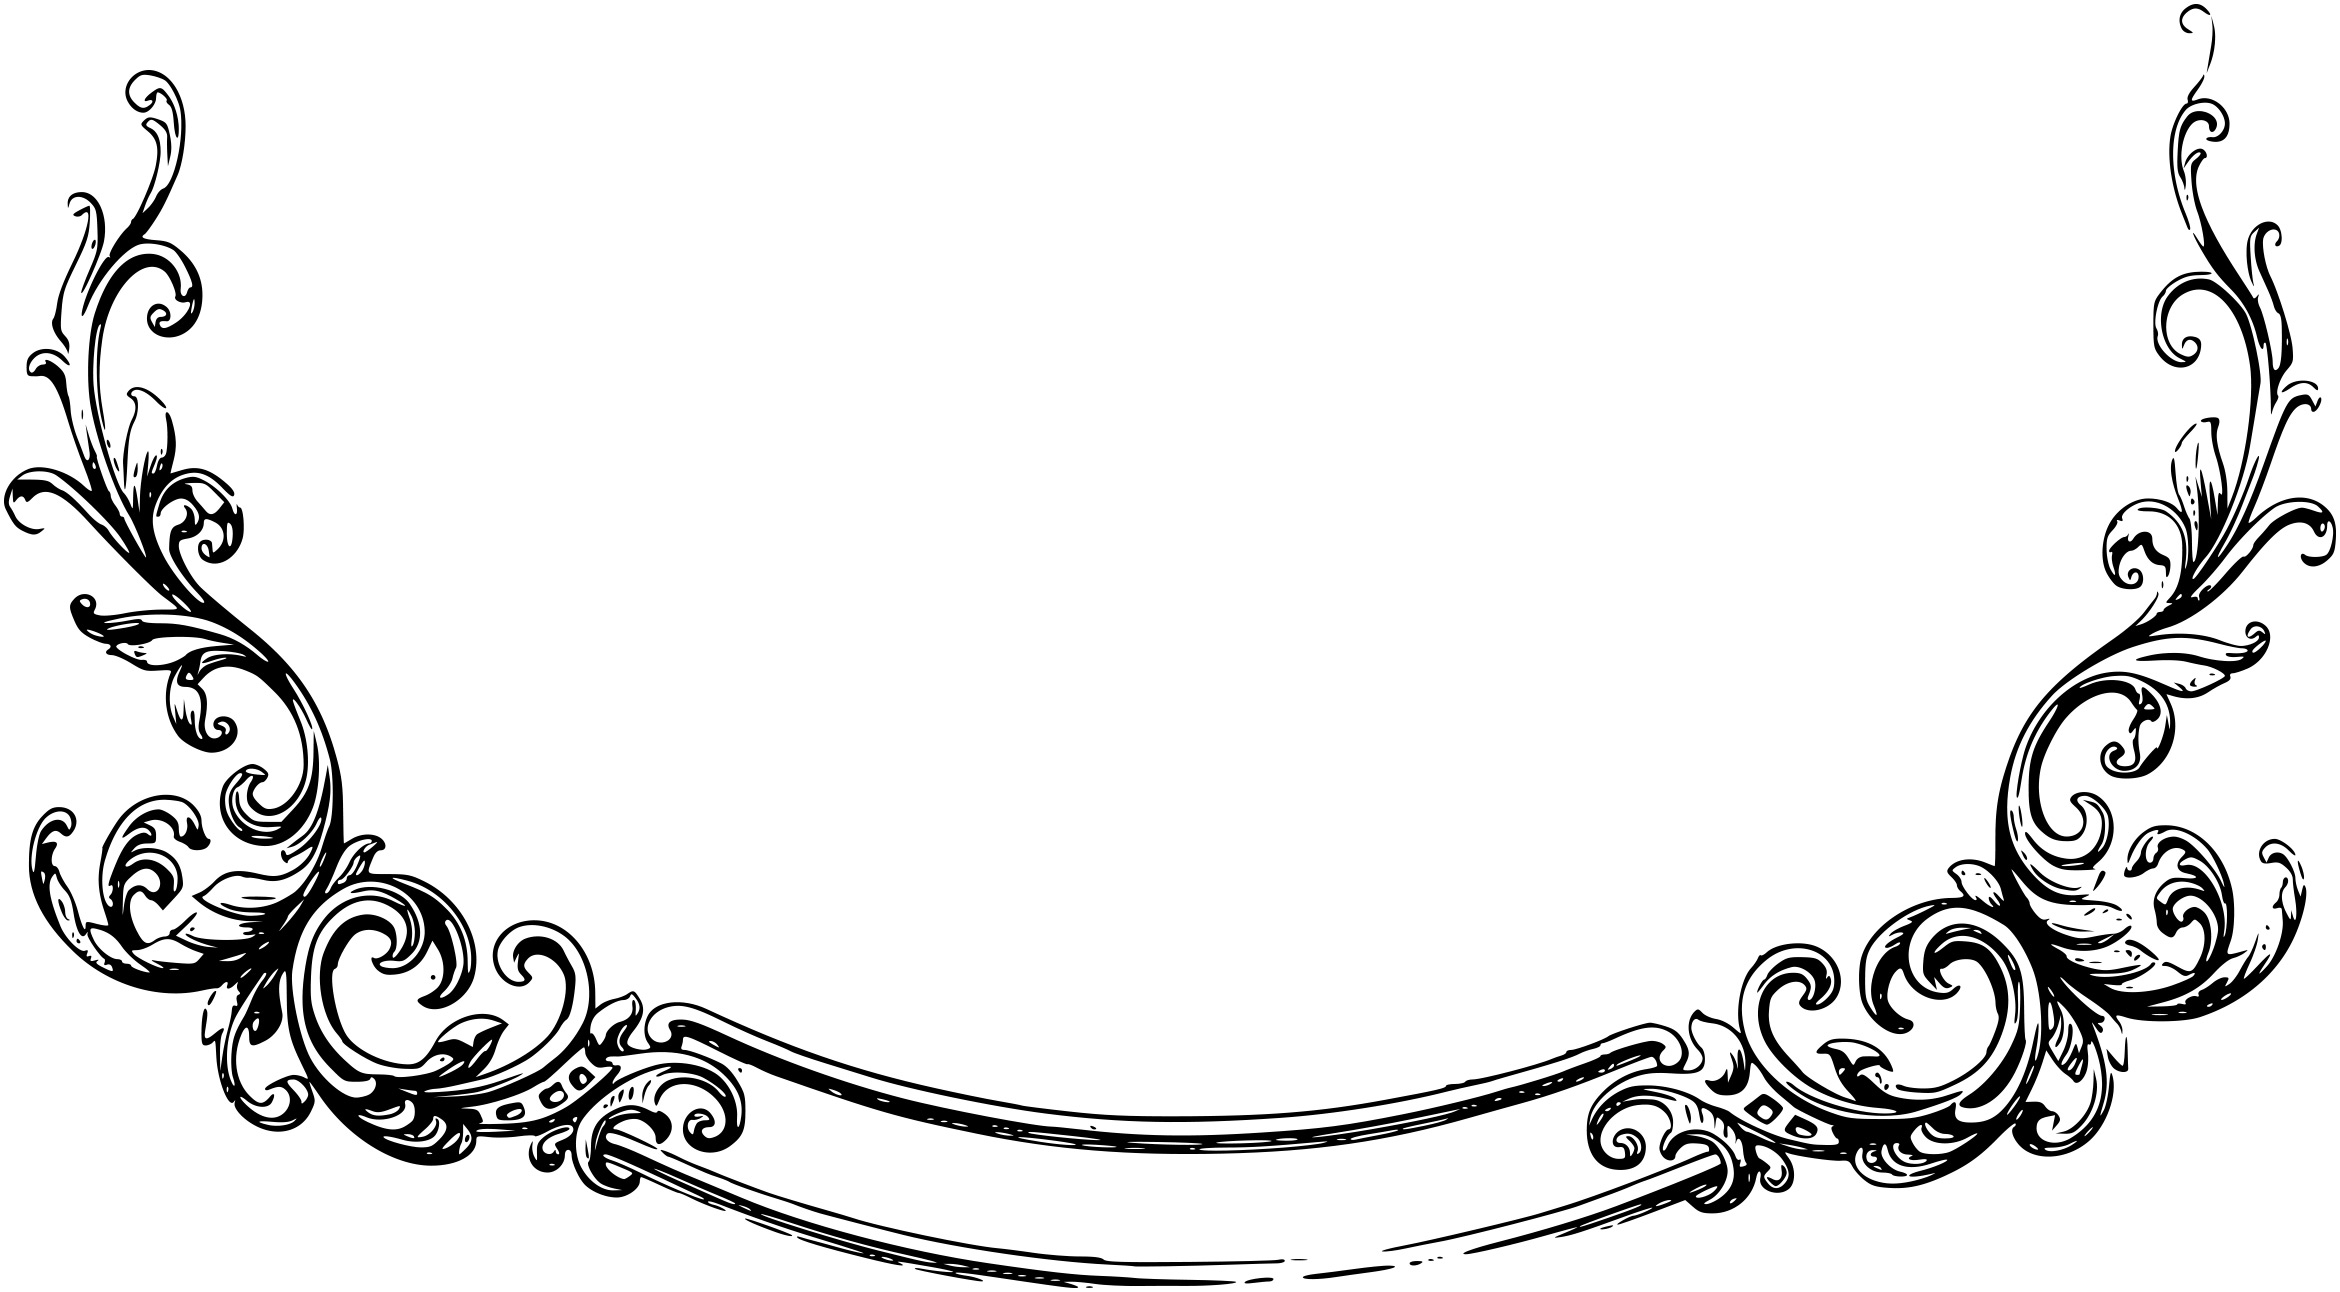 Scrollwork free scroll clipart free clipart images 2 image